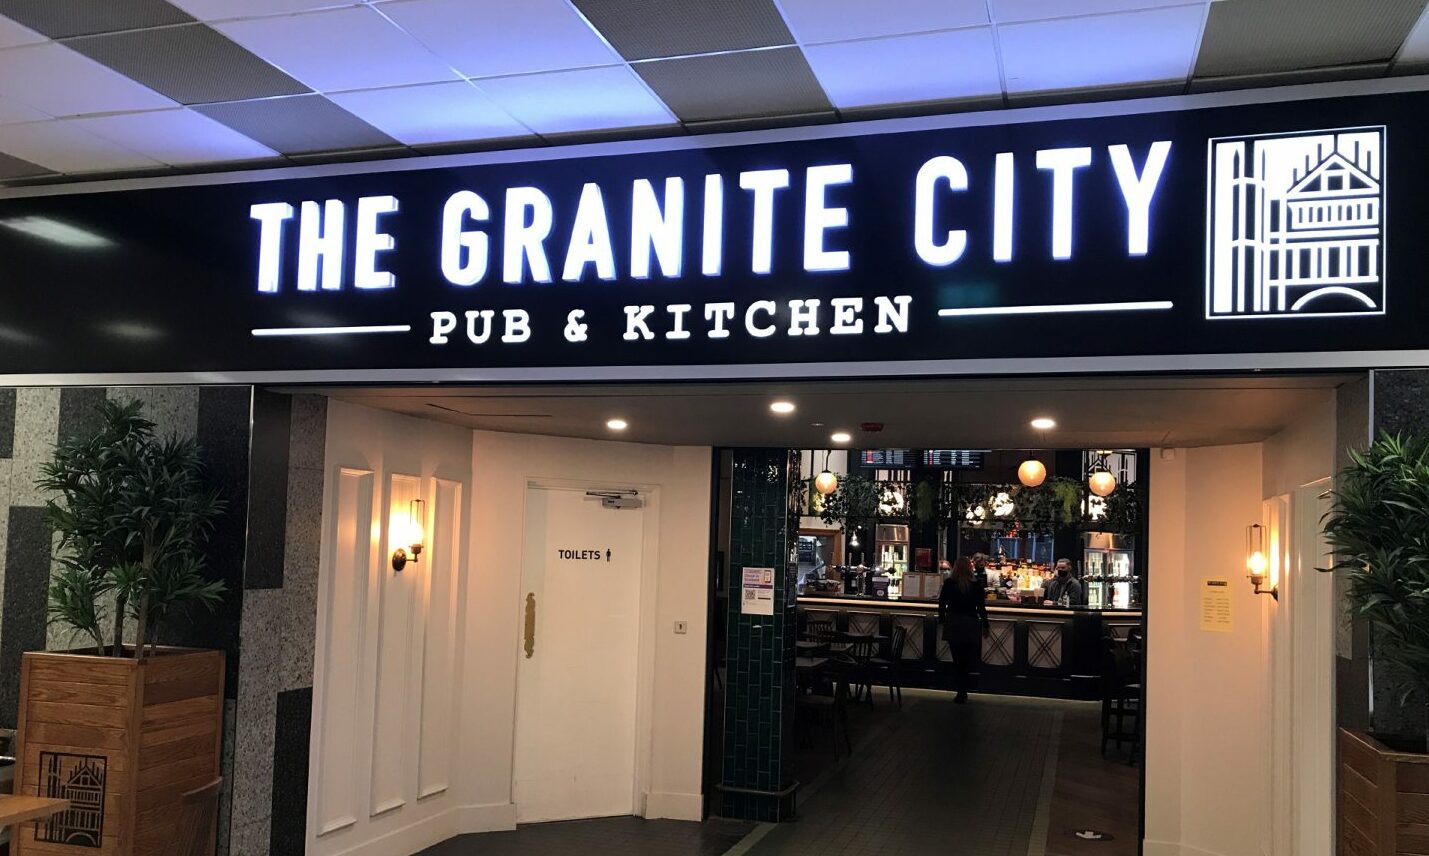 Entrance of The Granite City bar inside Aberdeen airport.